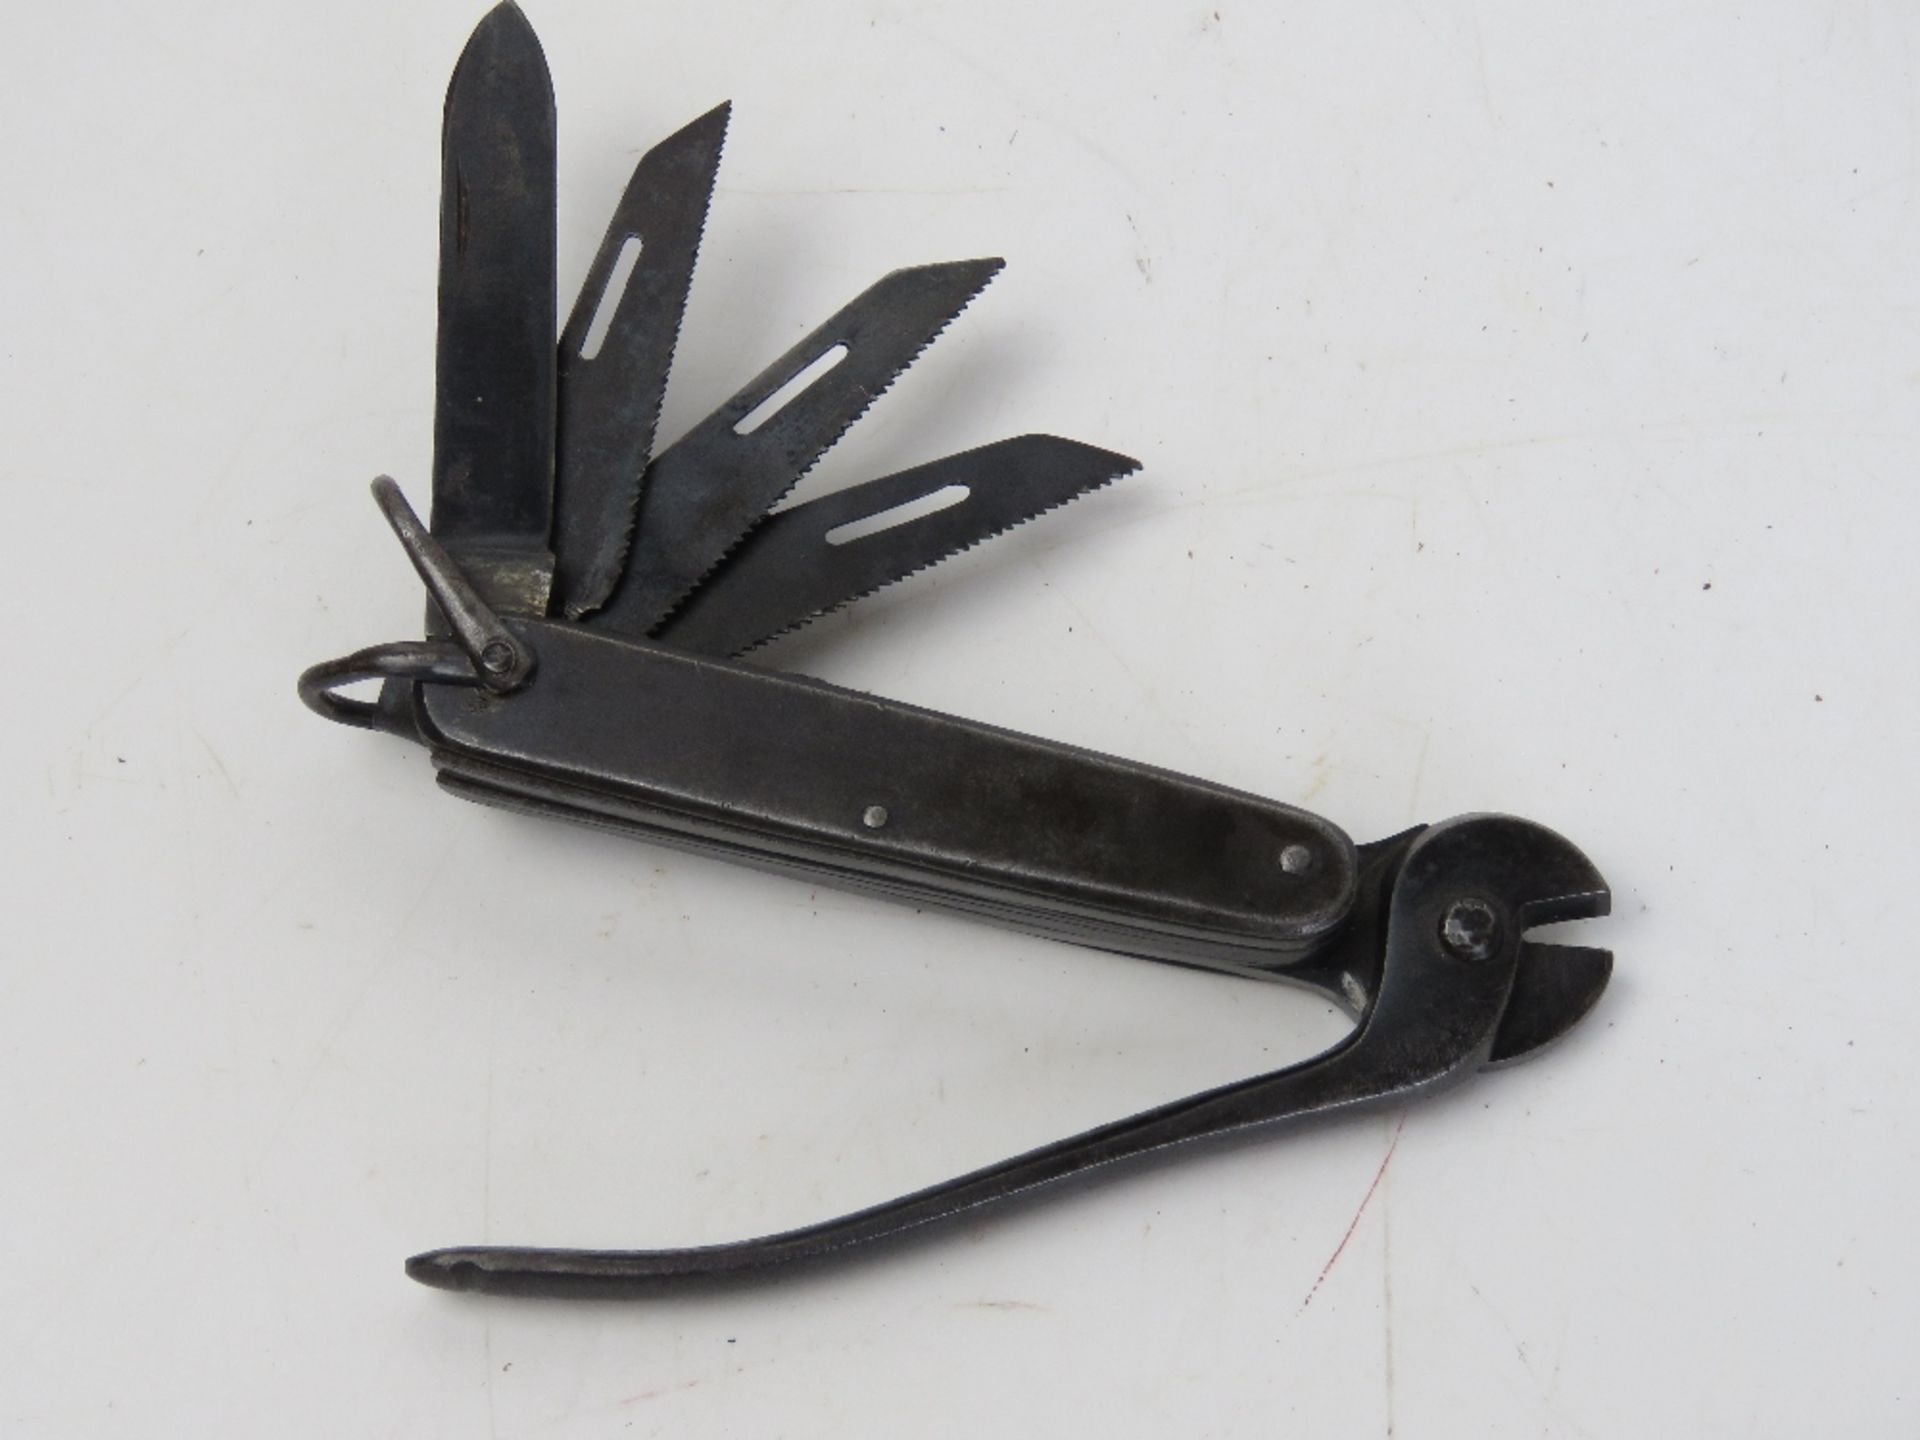 A WWII SOE multi tool, used by the SOE Operatives.